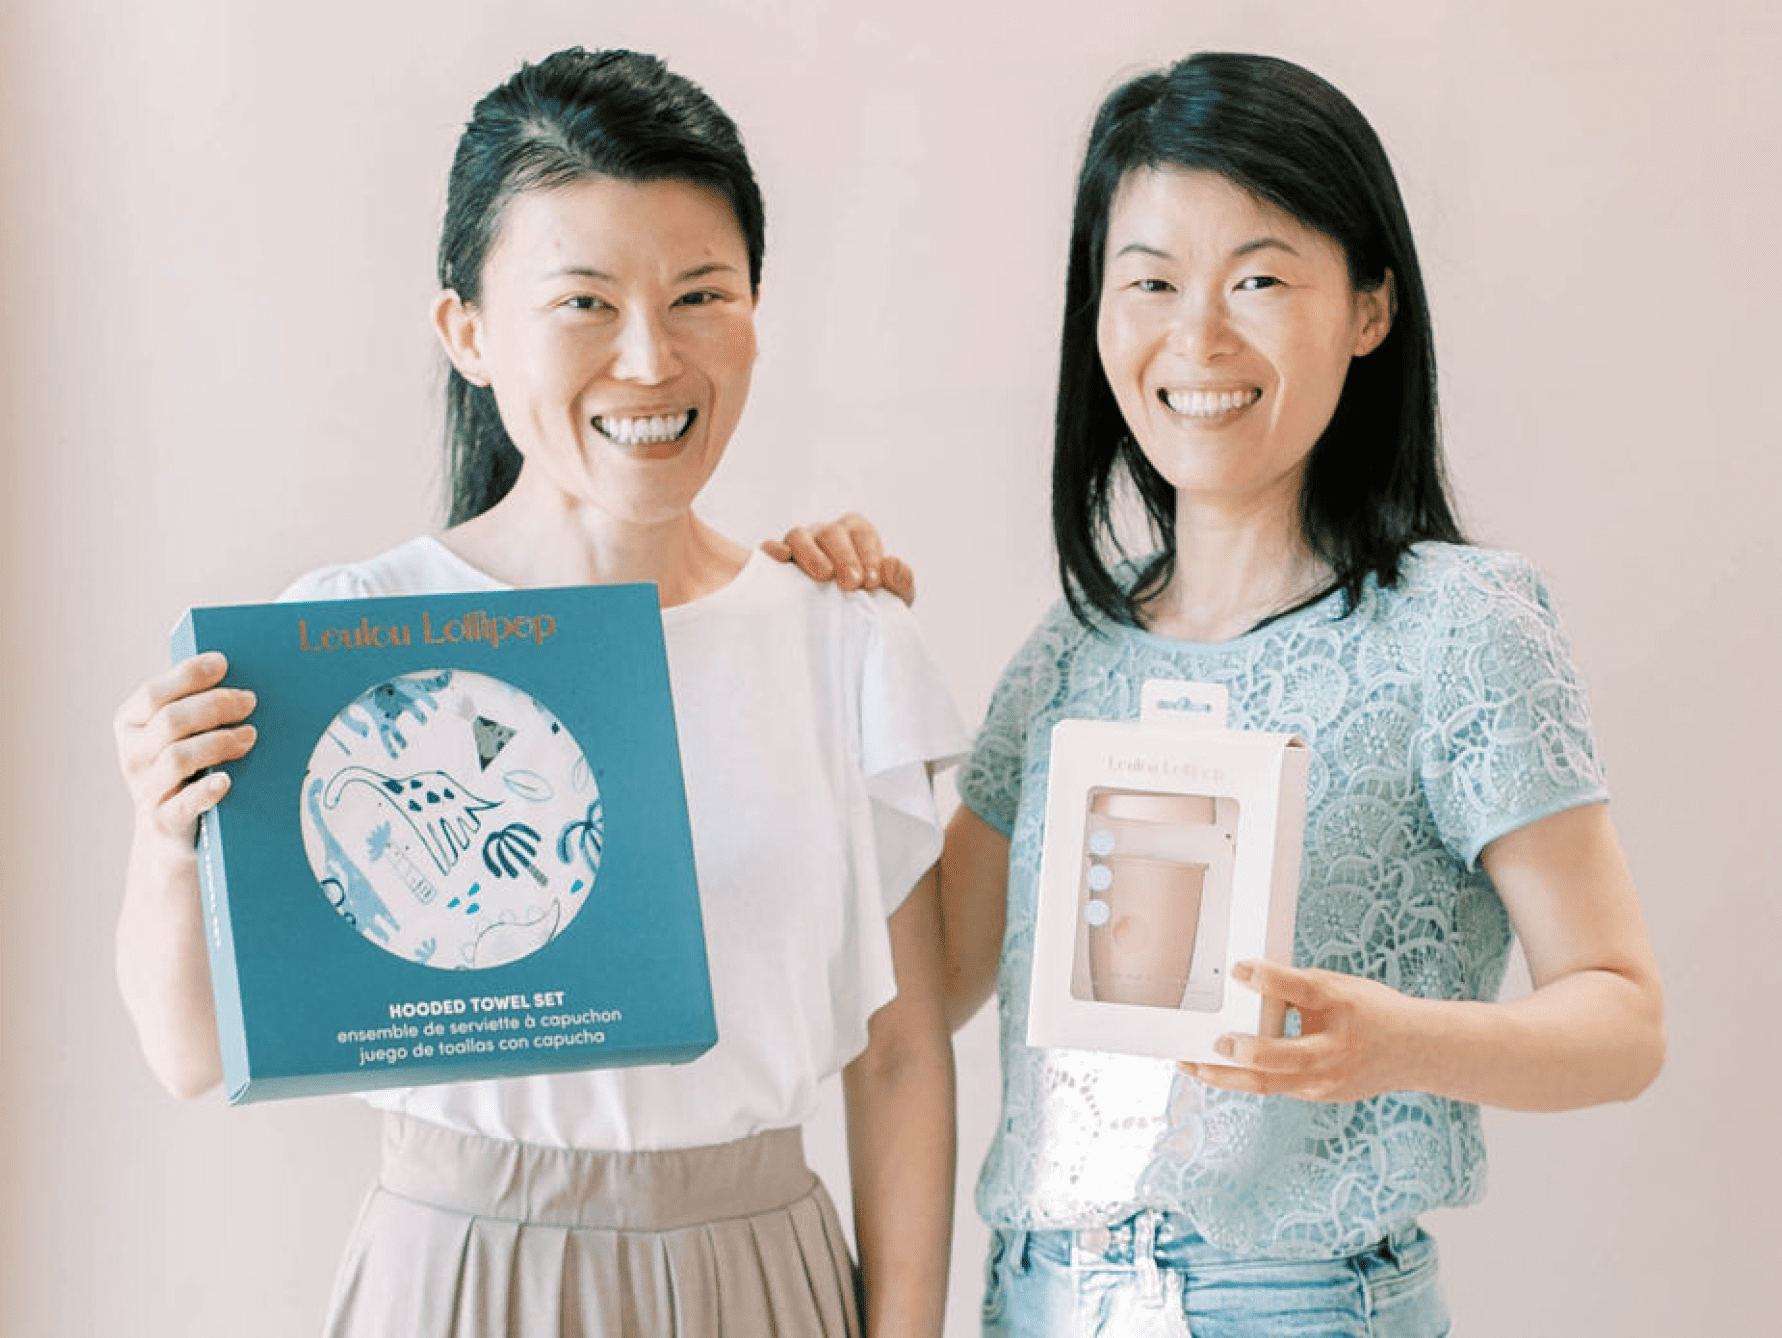 Angel Kho and Eleanor Lee, co-founders of Loulou Lollipop, holding examples of their products